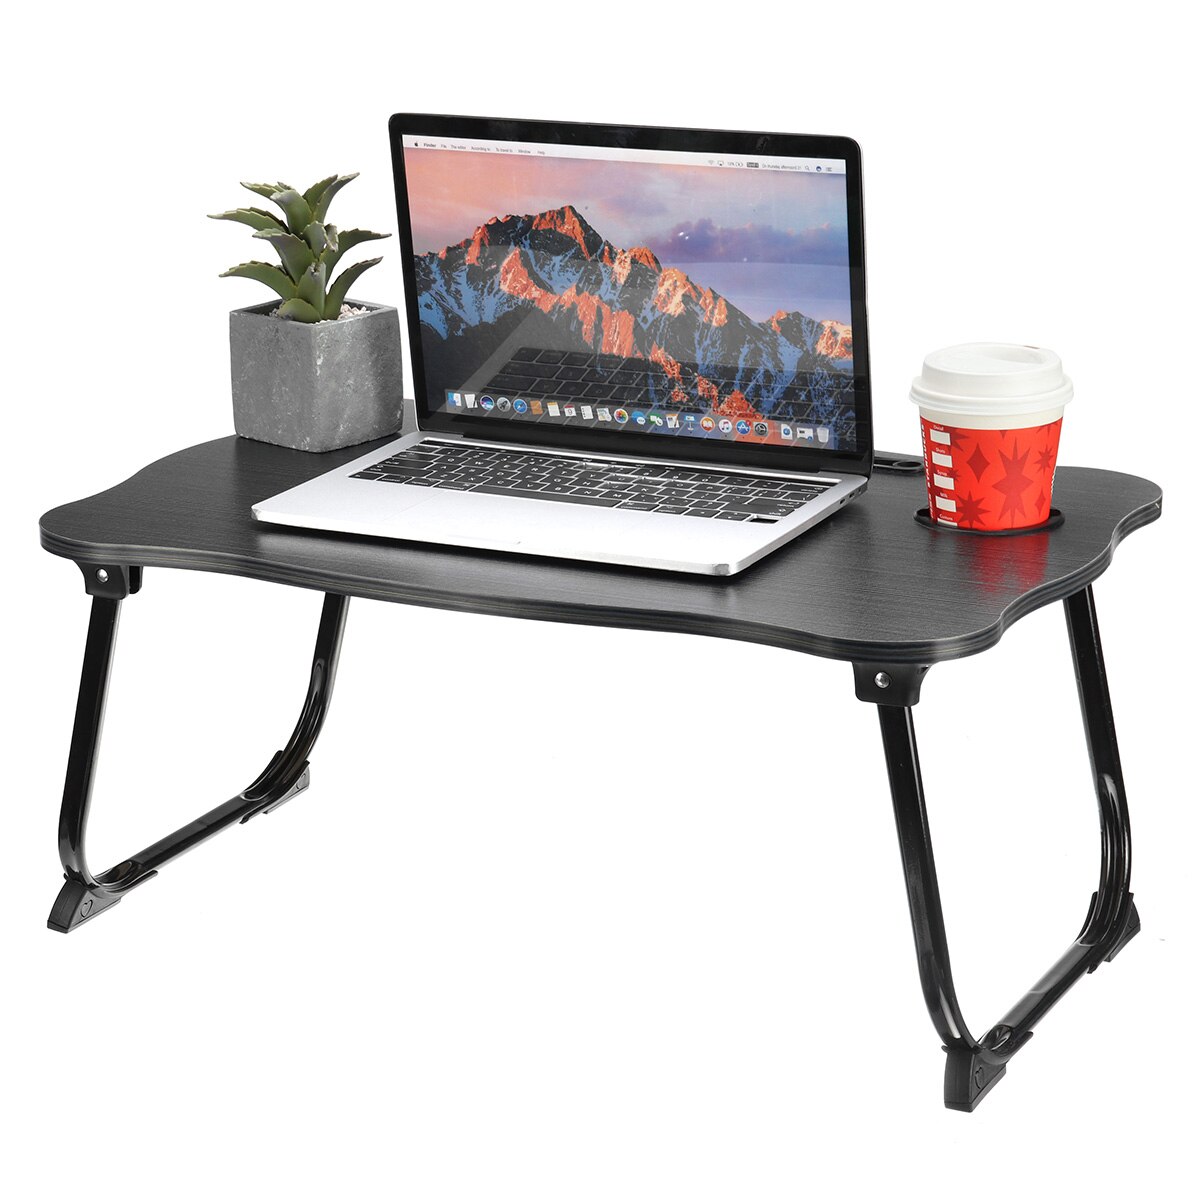 Portable NEW Folding Laptop Table Computer Desk Bed Table Sofa Small Desk With Slot Cup Holder Drawer Study Table Notebook Table